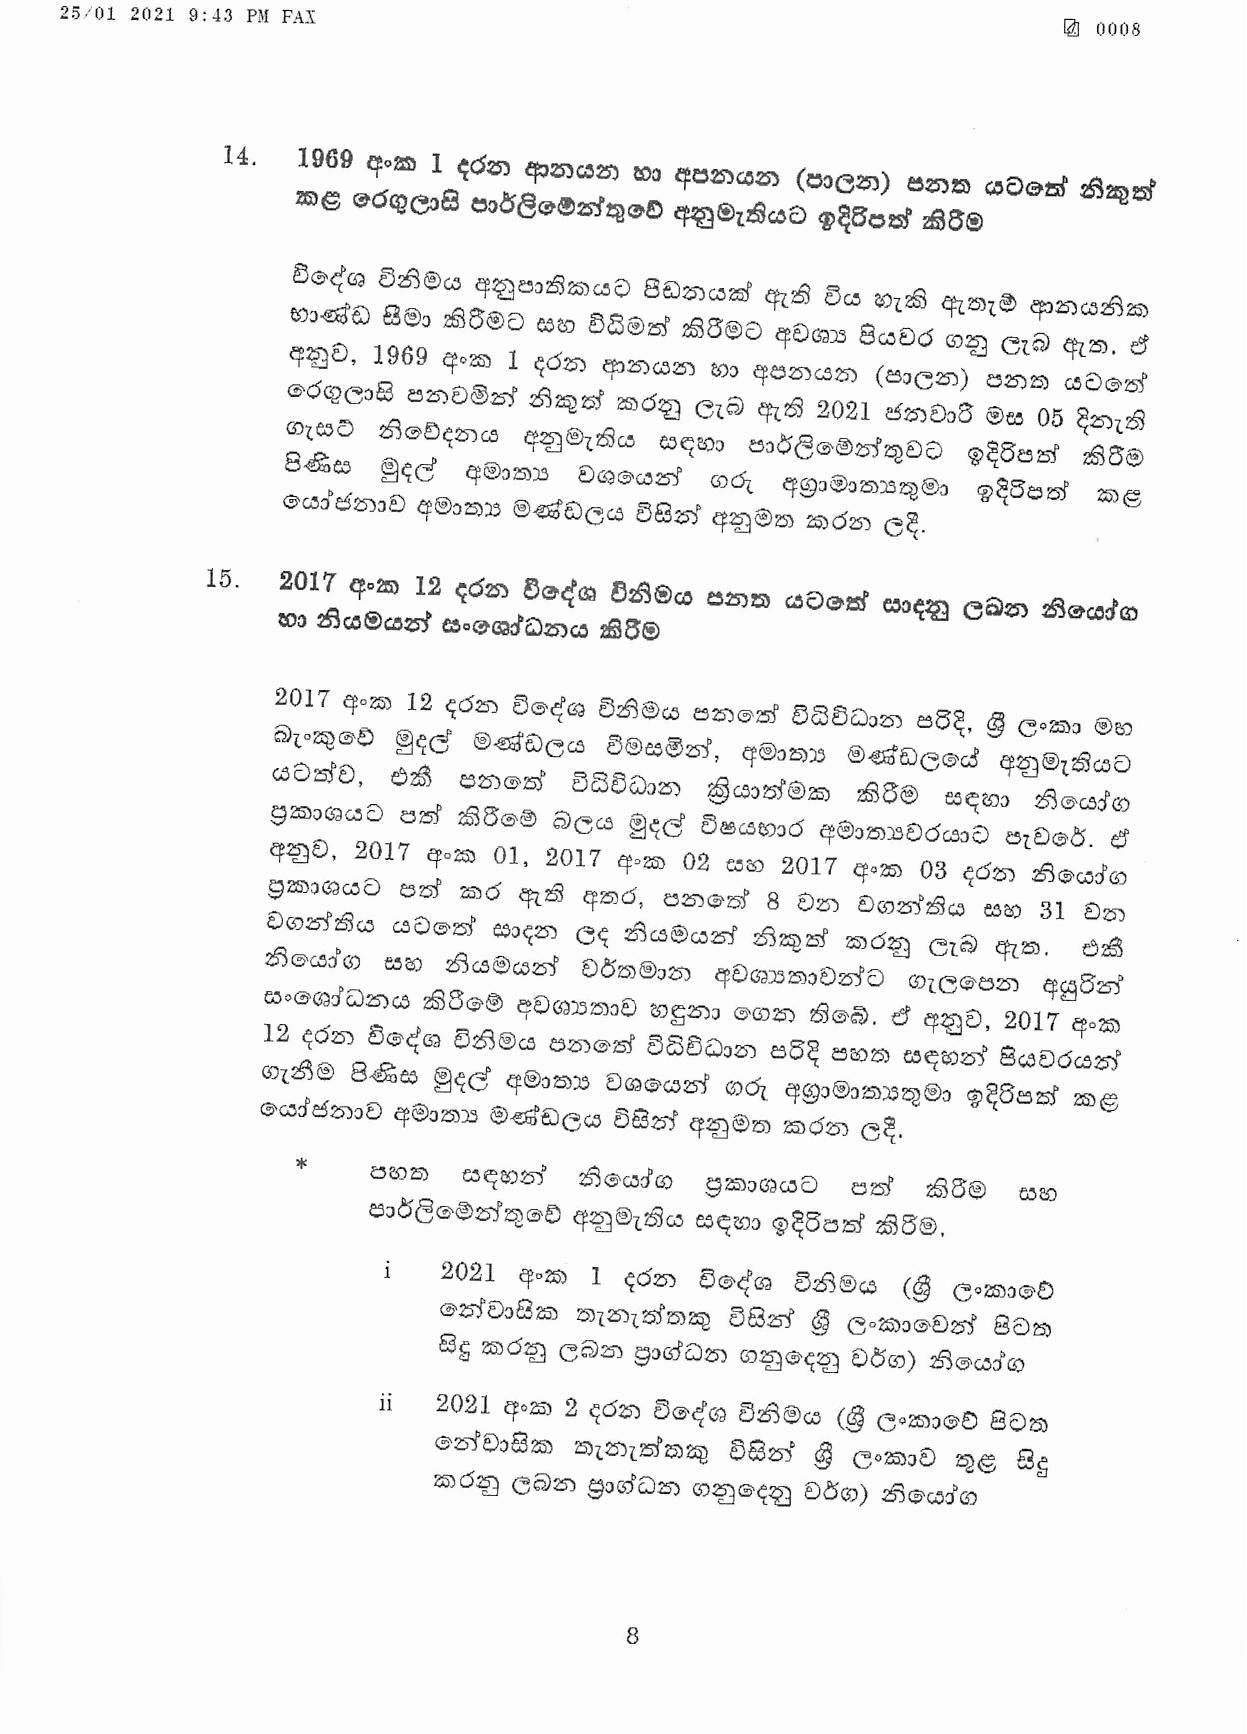 Cabinet Decision on 25.01.2021 1 page 008